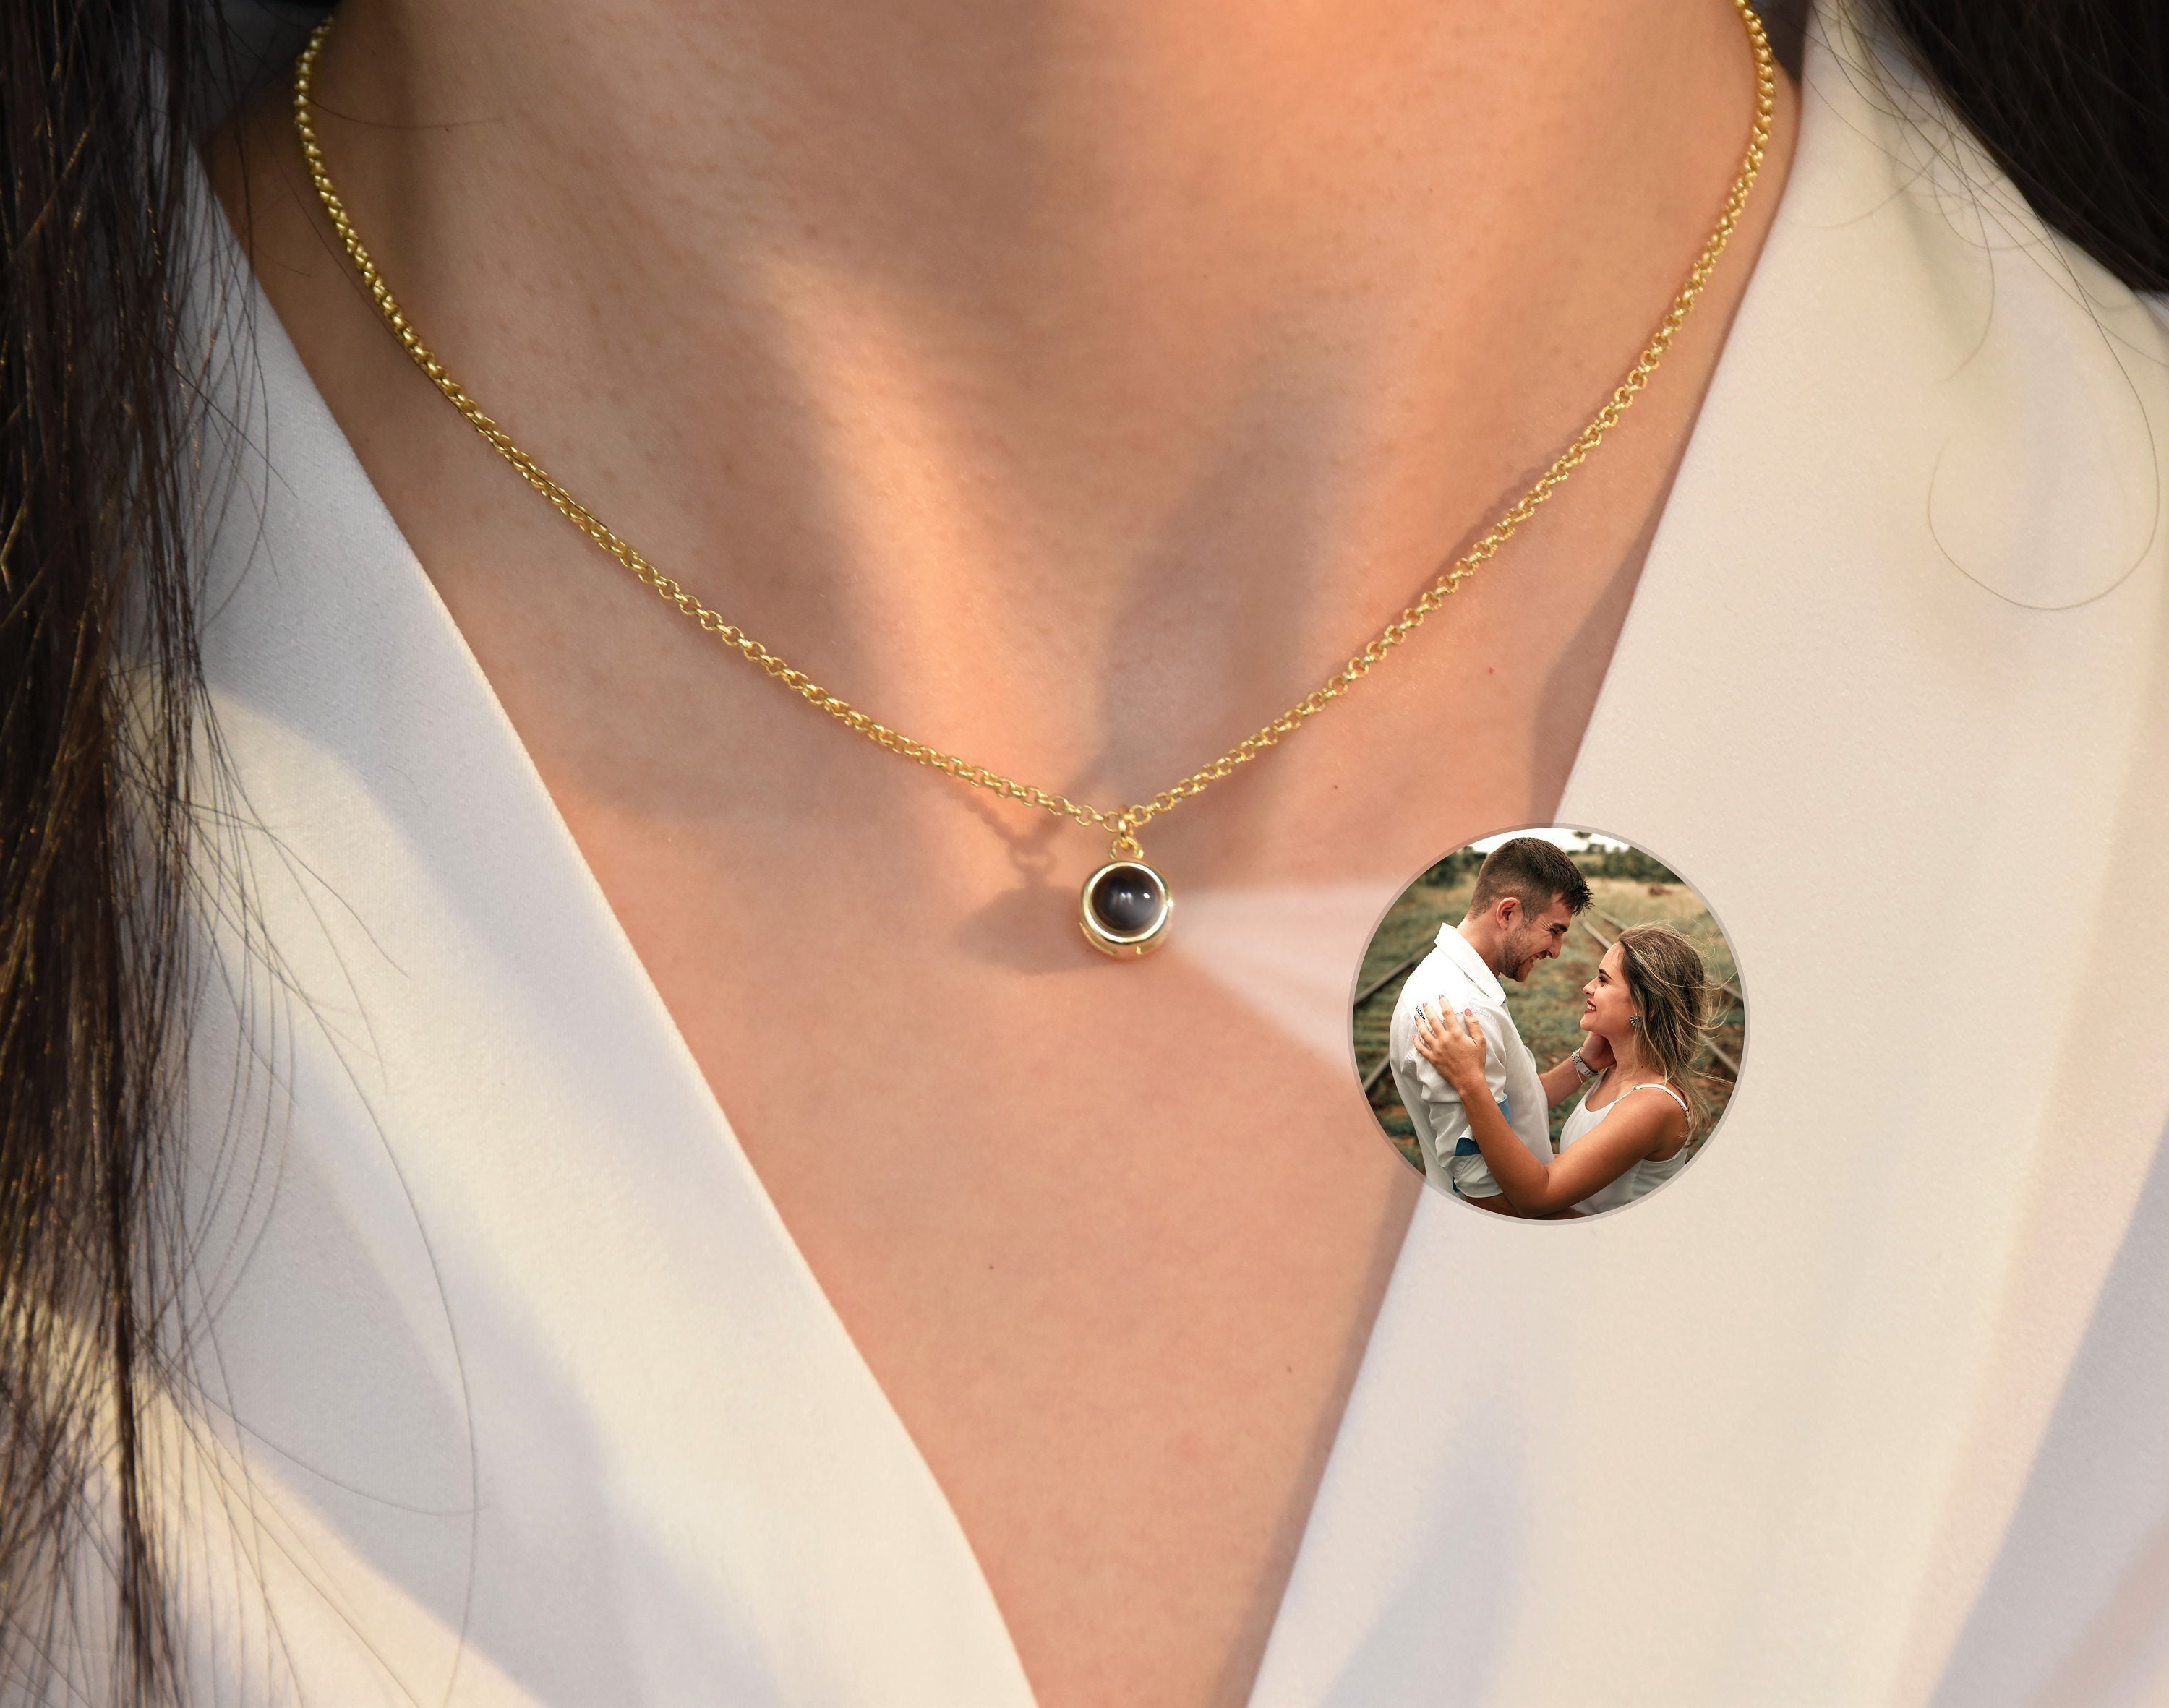 Custom Photo Projection Necklace,personaliz Projection Necklace,round Pendant  Necklace,picture Inside Jewelry,memorial Necklace,gift for Her - Etsy